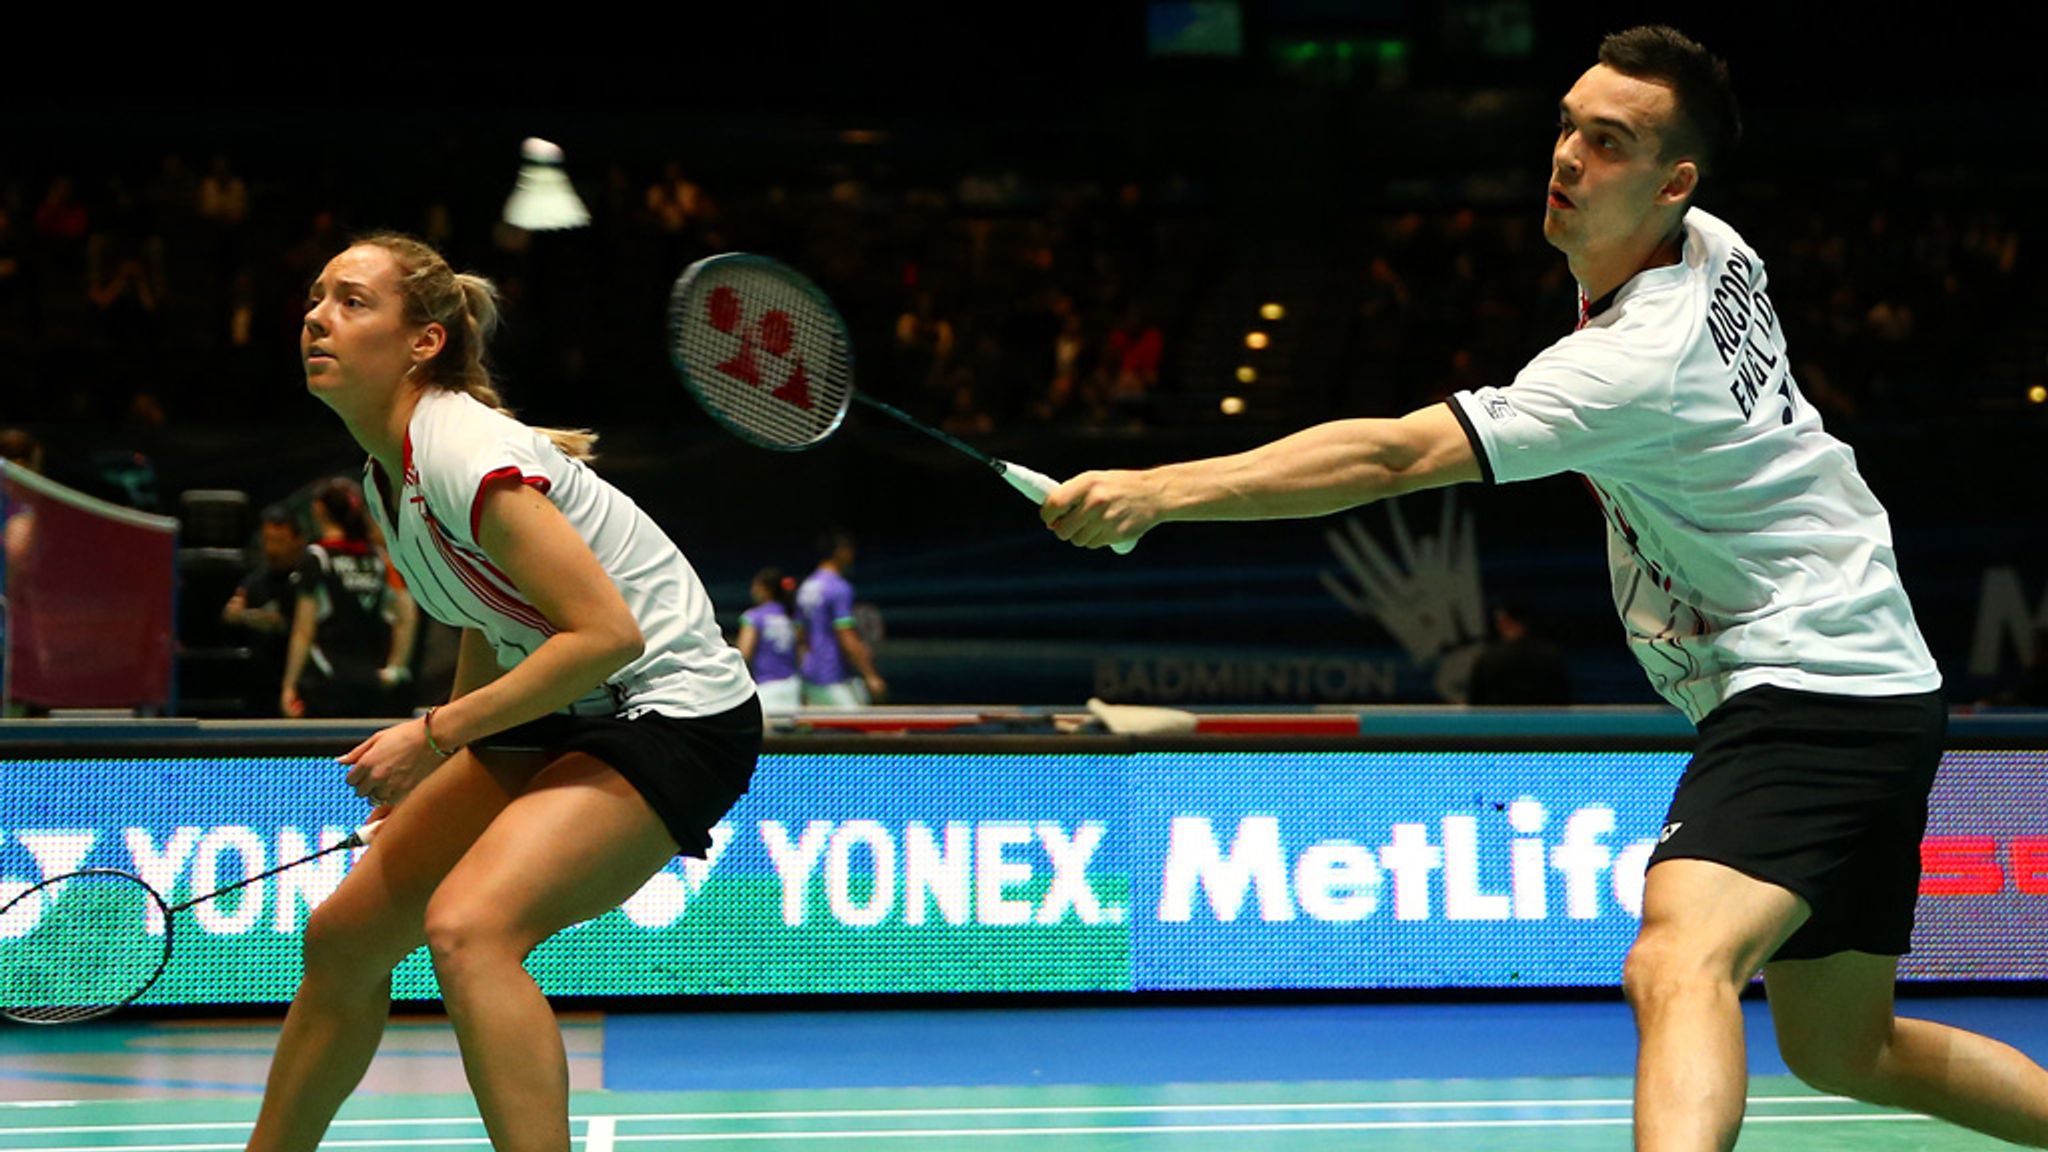 Adcocks lose in quarter-finals of YONEX All-England Badminton Championships News News Sky Sports